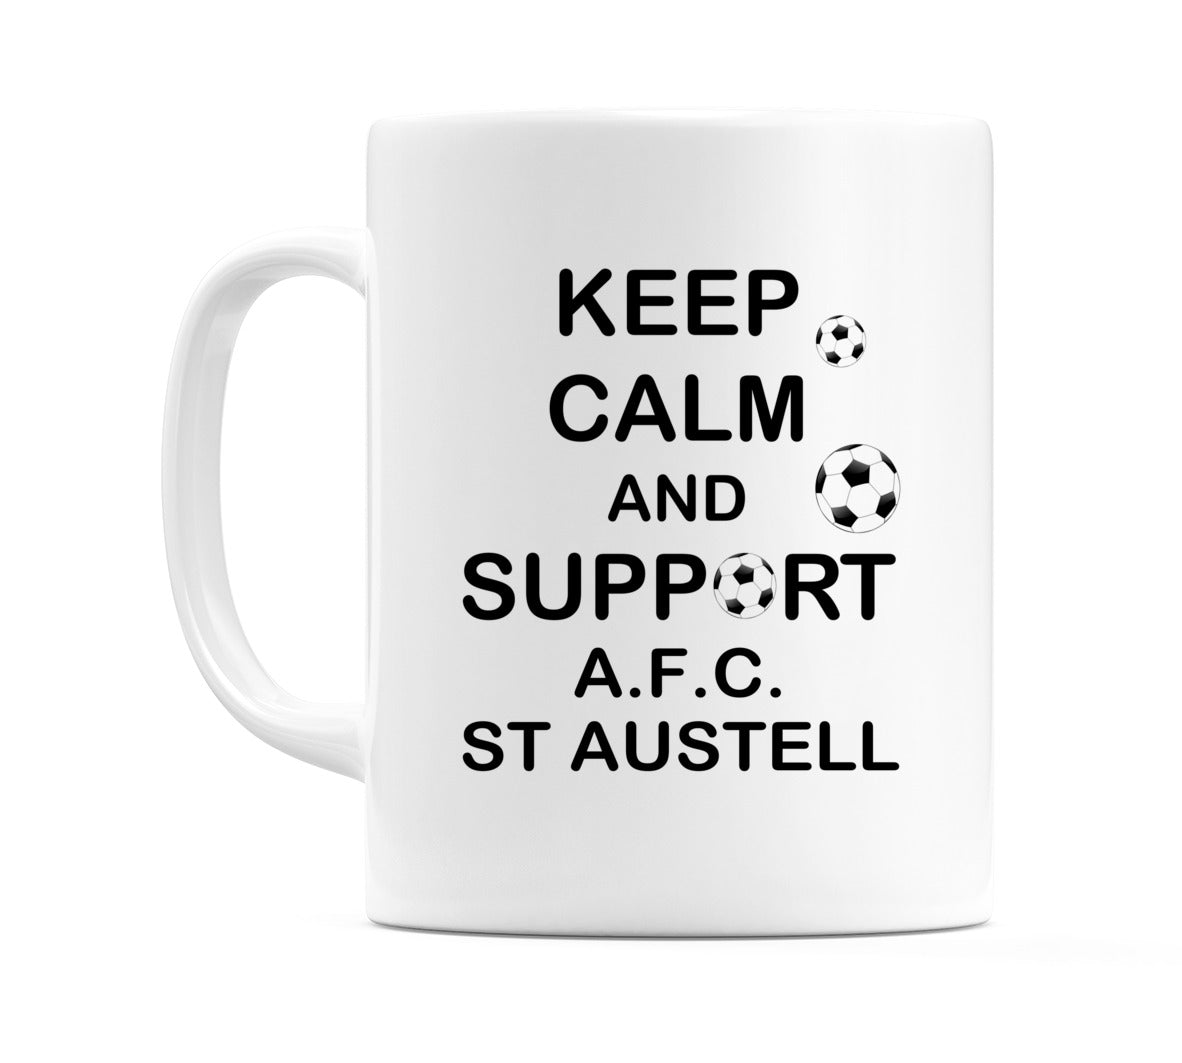 Keep Calm And Support A.F.C. St Austell Mug